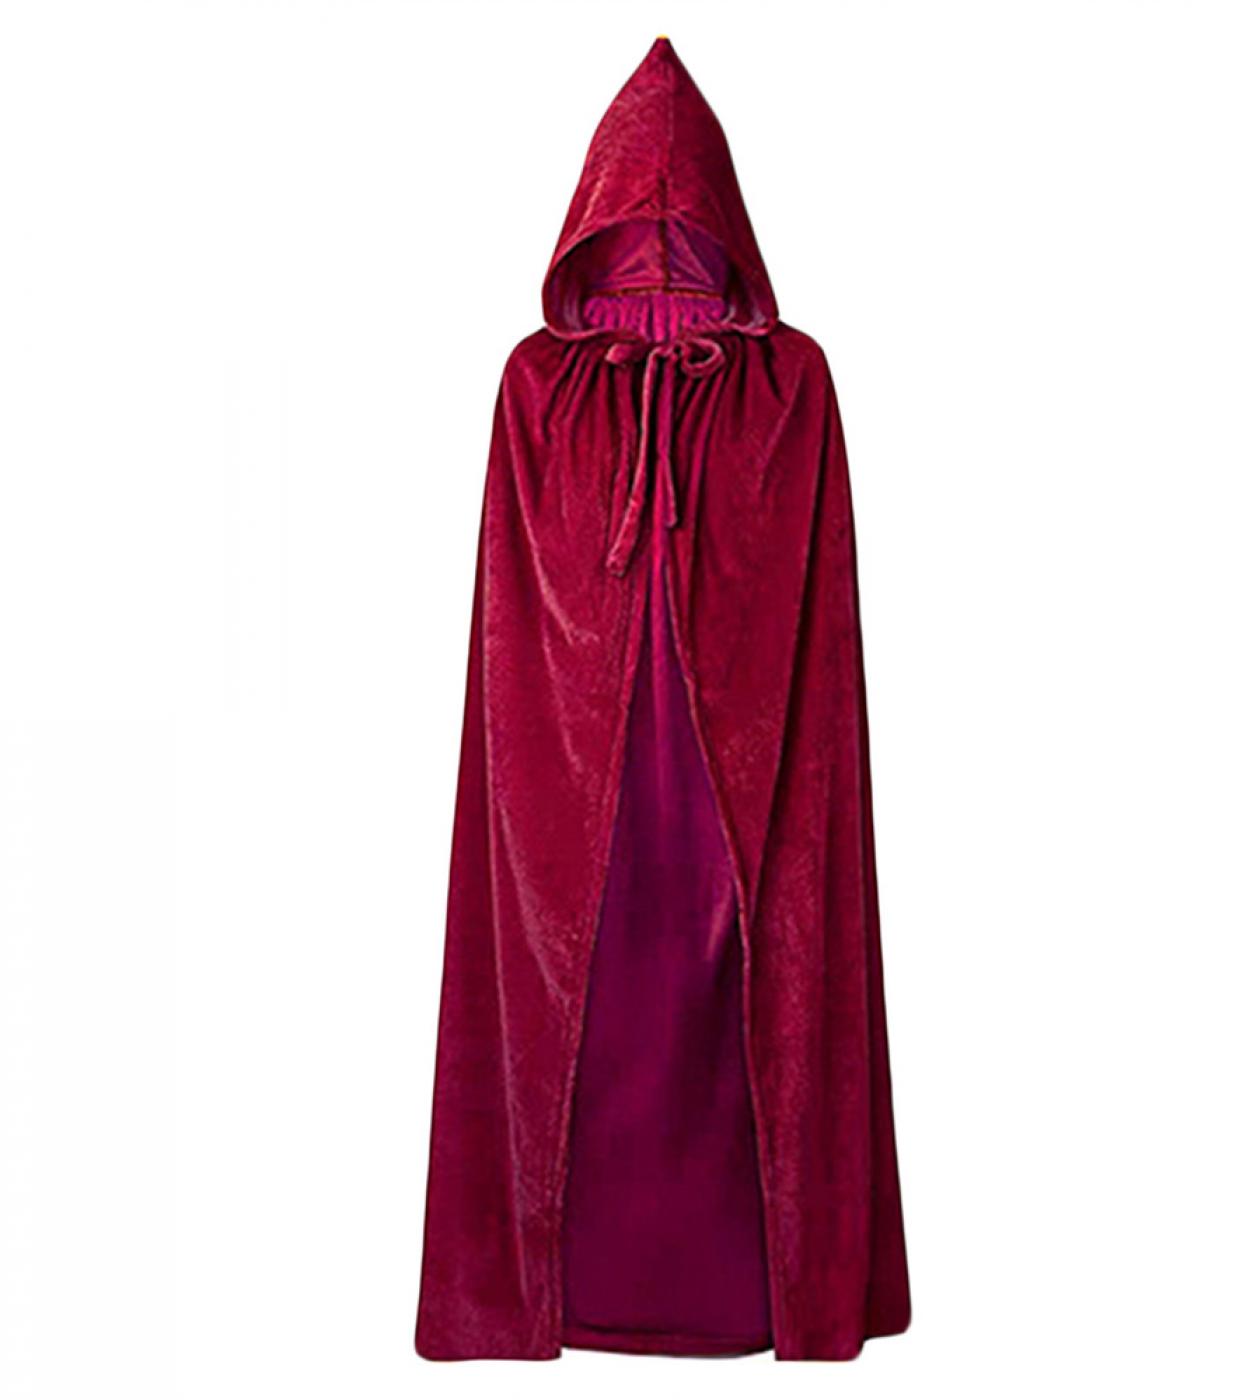 Tetyseysh Men Women Halloween Hooded Cloak Cosplay Costumes Uni Solid Color Cape For Role Play Costumes Accessories